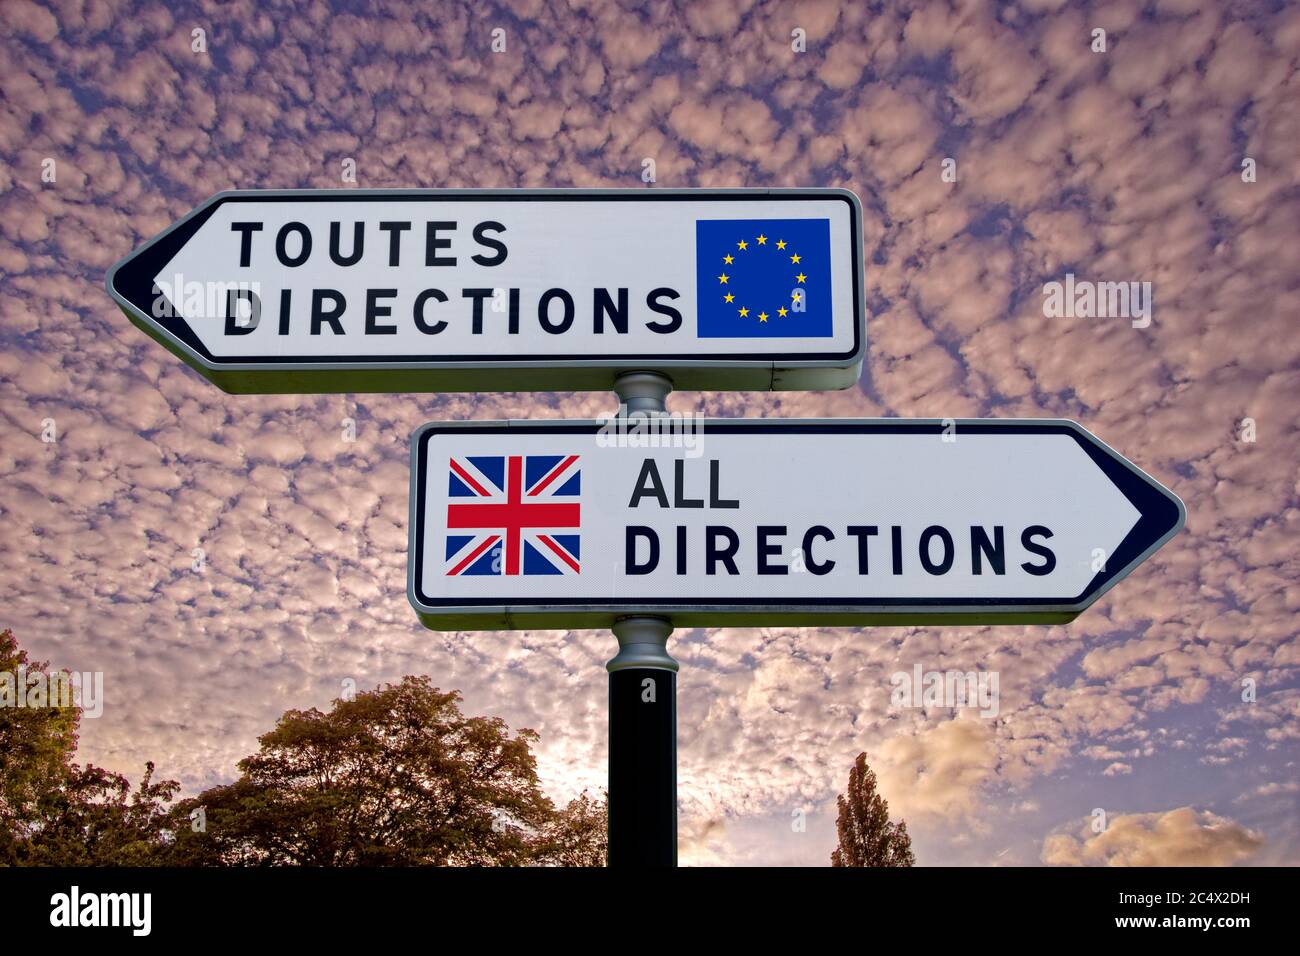 French style double signpost with opposing UK/EU pointers. Stock Photo